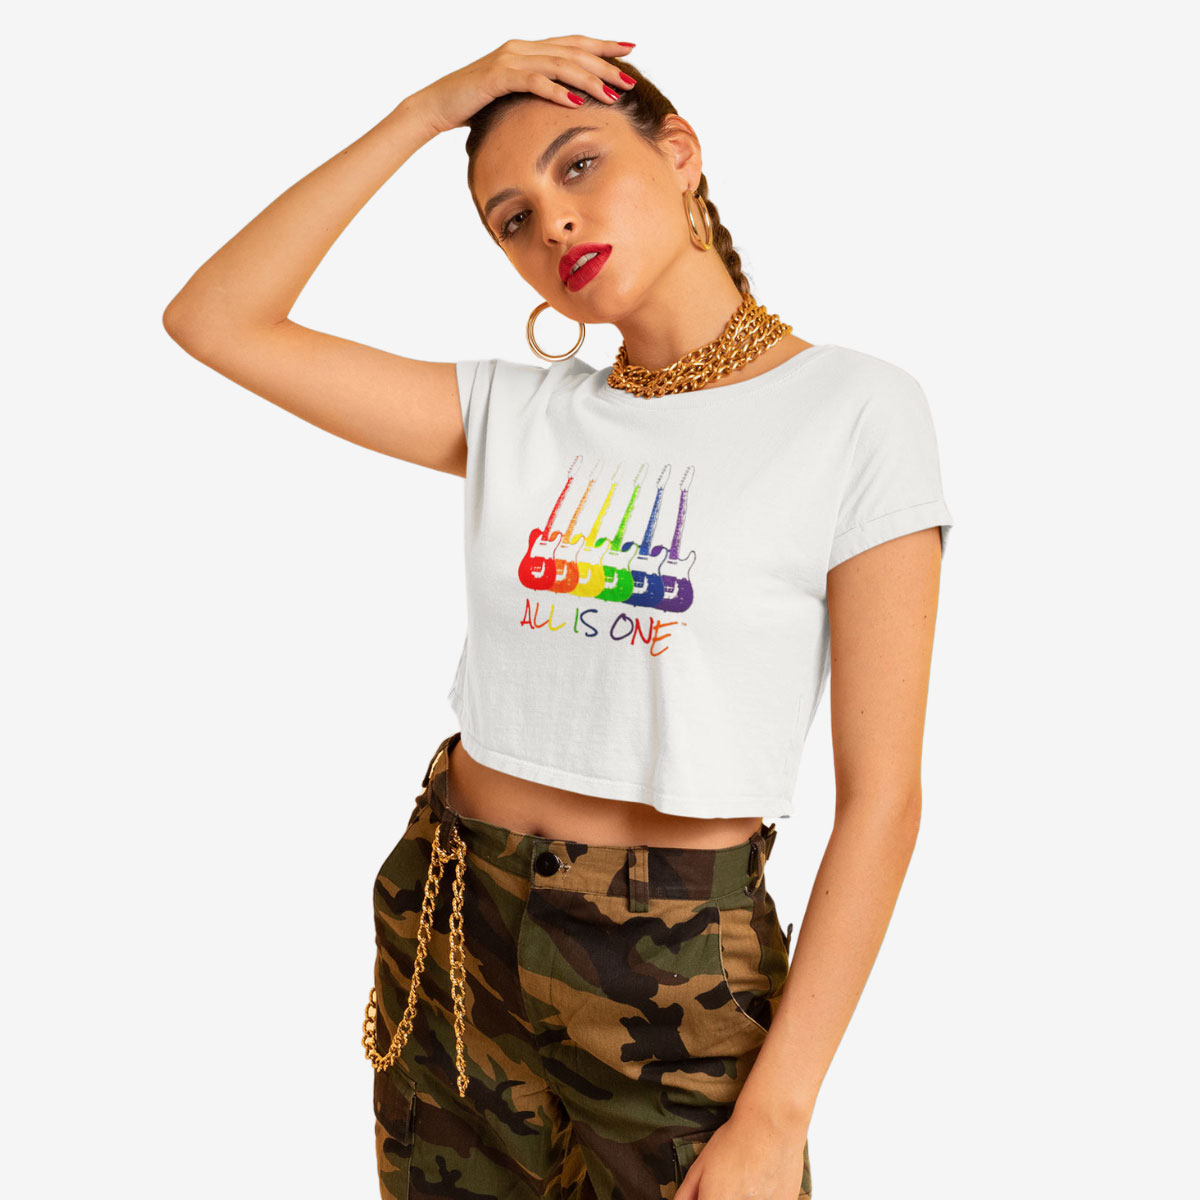 Retro Cropped Top Tee with Rainbow Guitars All Is One Design image number 3